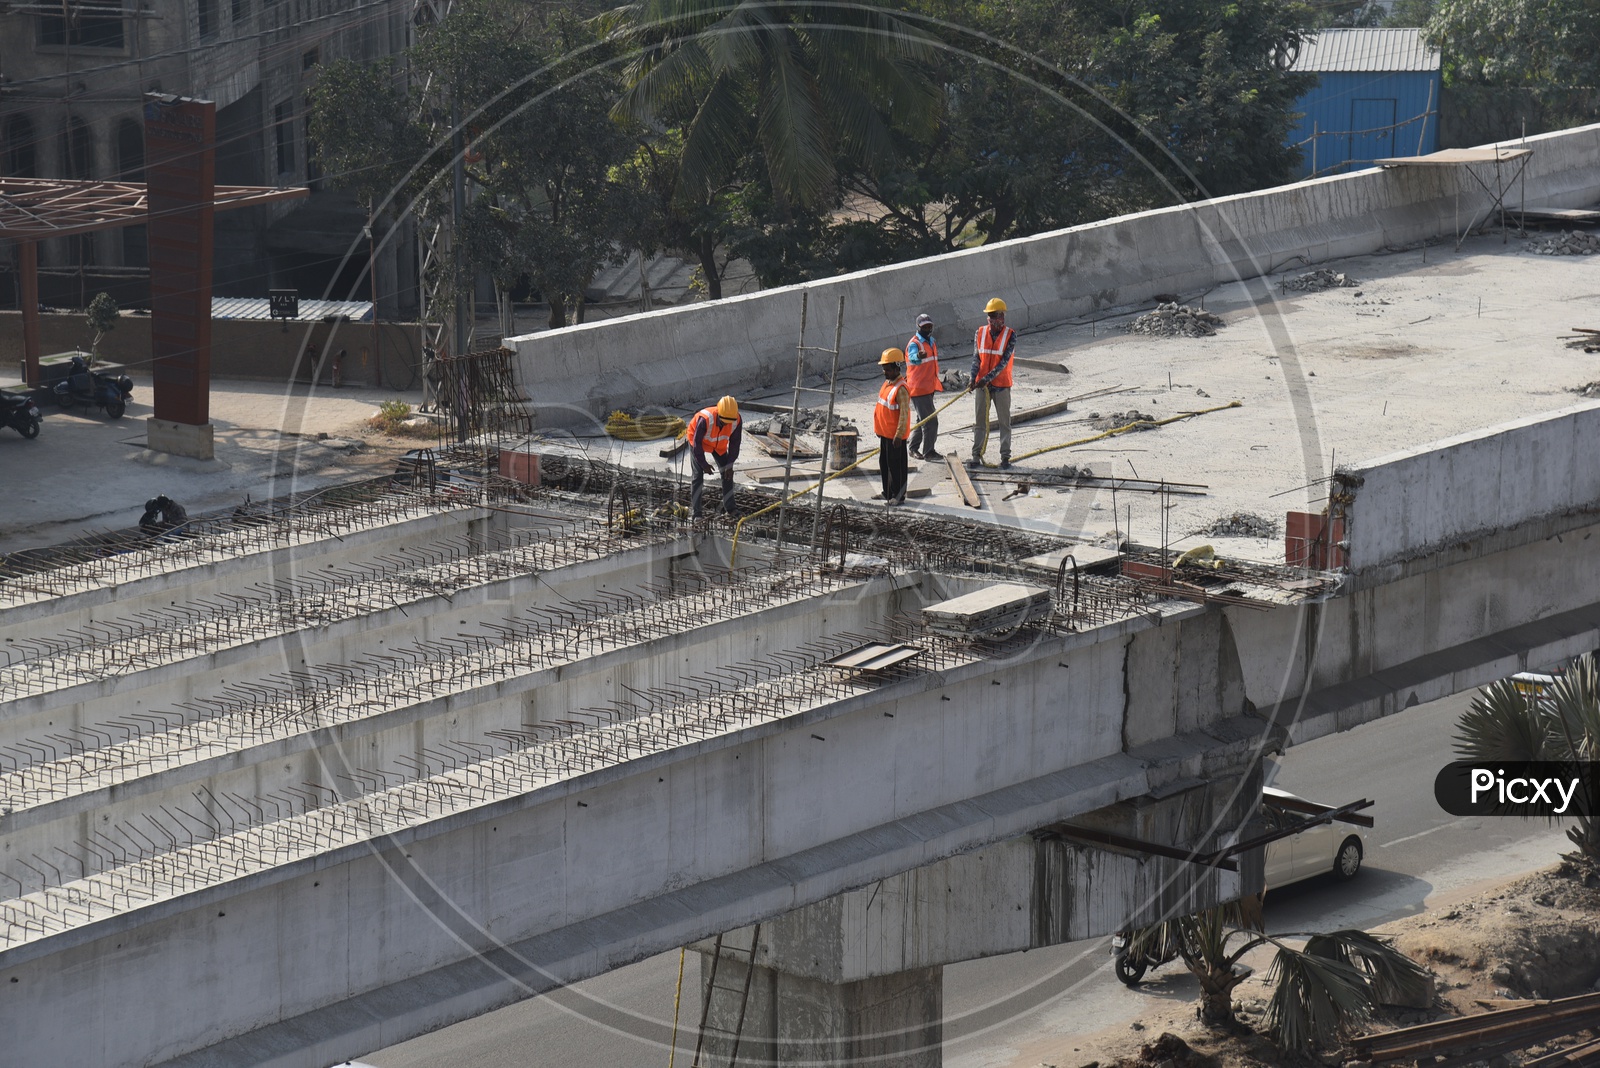 Under Construction Biodiversity Flyover 2 Connecting Gachibowli And Raidurgam in Hyderabad City With Construction Workers